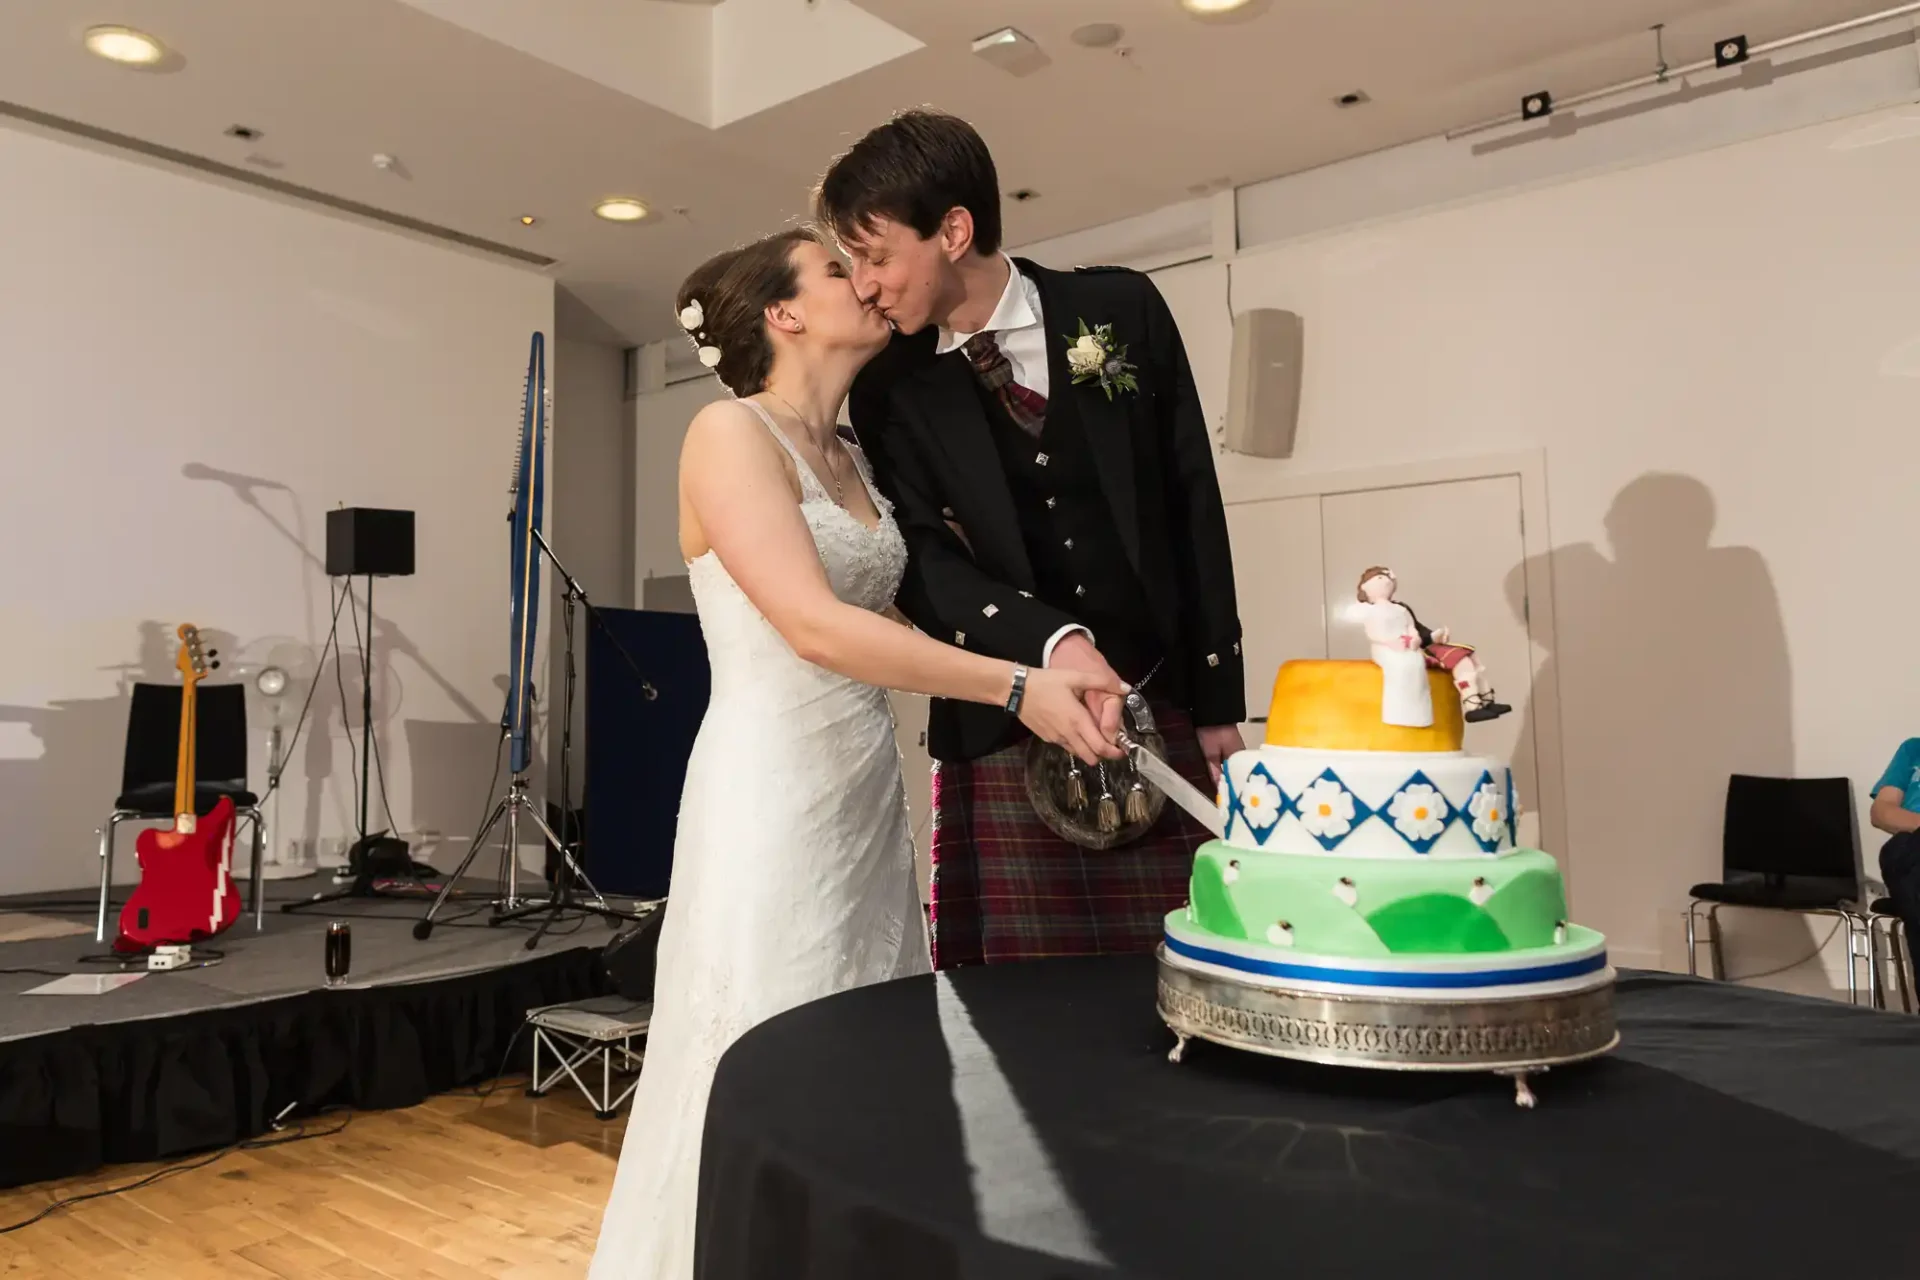 A bride and groom in wedding attire kiss as they cut a three-tiered cake at their reception. the groom wears a kilt and the cake is decorated in bright colors.